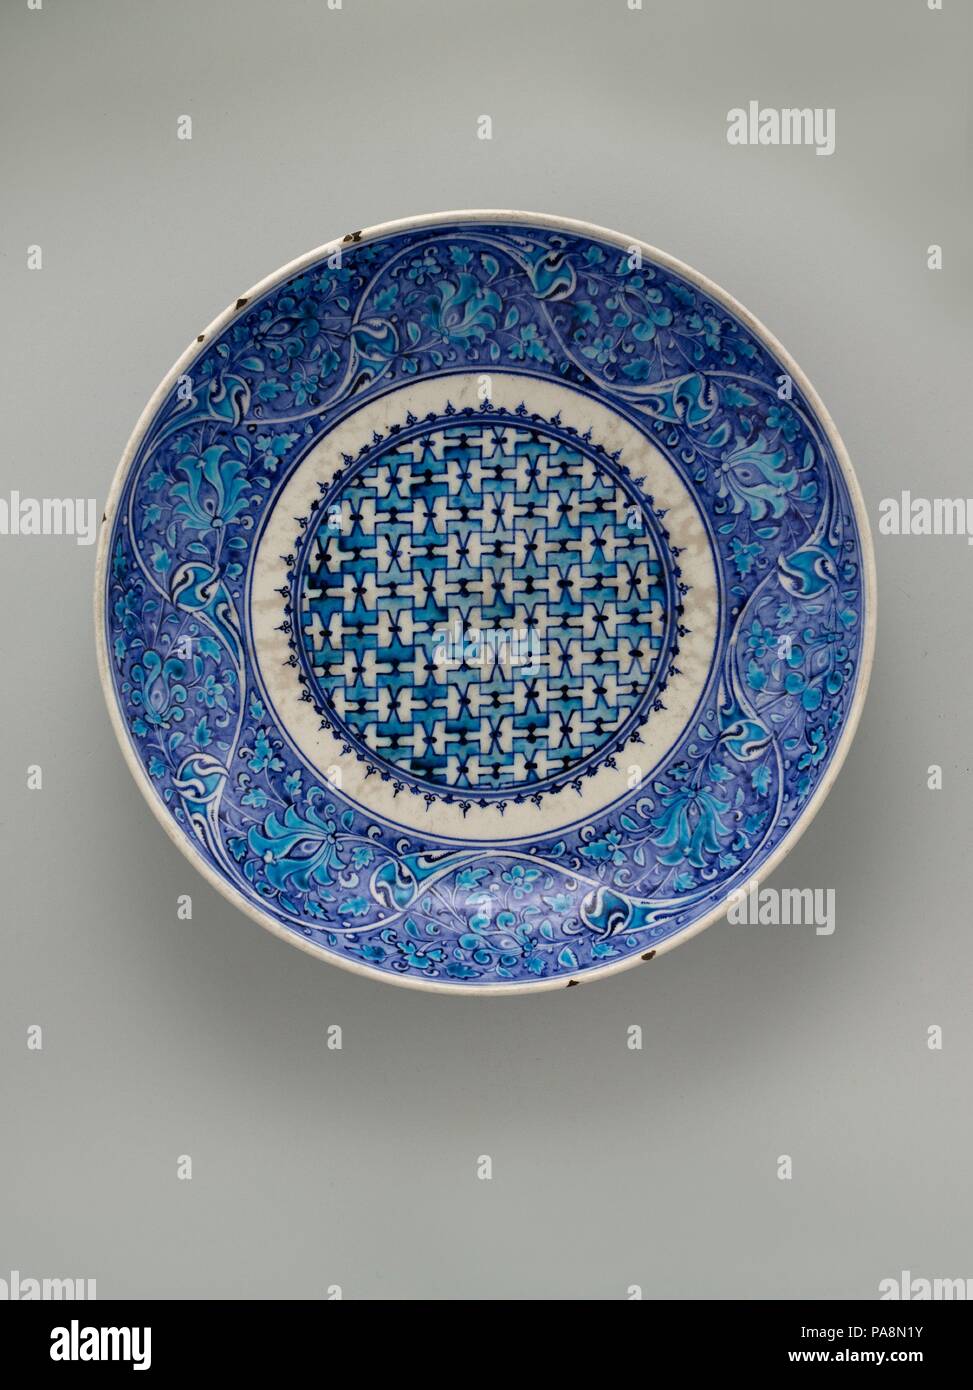 Dish. Dimensions: H. 3 in. (7.62 cm)  Diam. 15 1/2 in. (39.4 cm). Date: mid-16th century.  One of the most spectacular Iznik pieces in the Museum's collection, this saucer-shaped dish displays a palette of rich blue and bright turquoise characteristic of early Iznik ceramics. The floral scrolls on the cavetto are inspired by fifteenth-century Chinese celadon ware. Museum: Metropolitan Museum of Art, New York, USA. Stock Photo